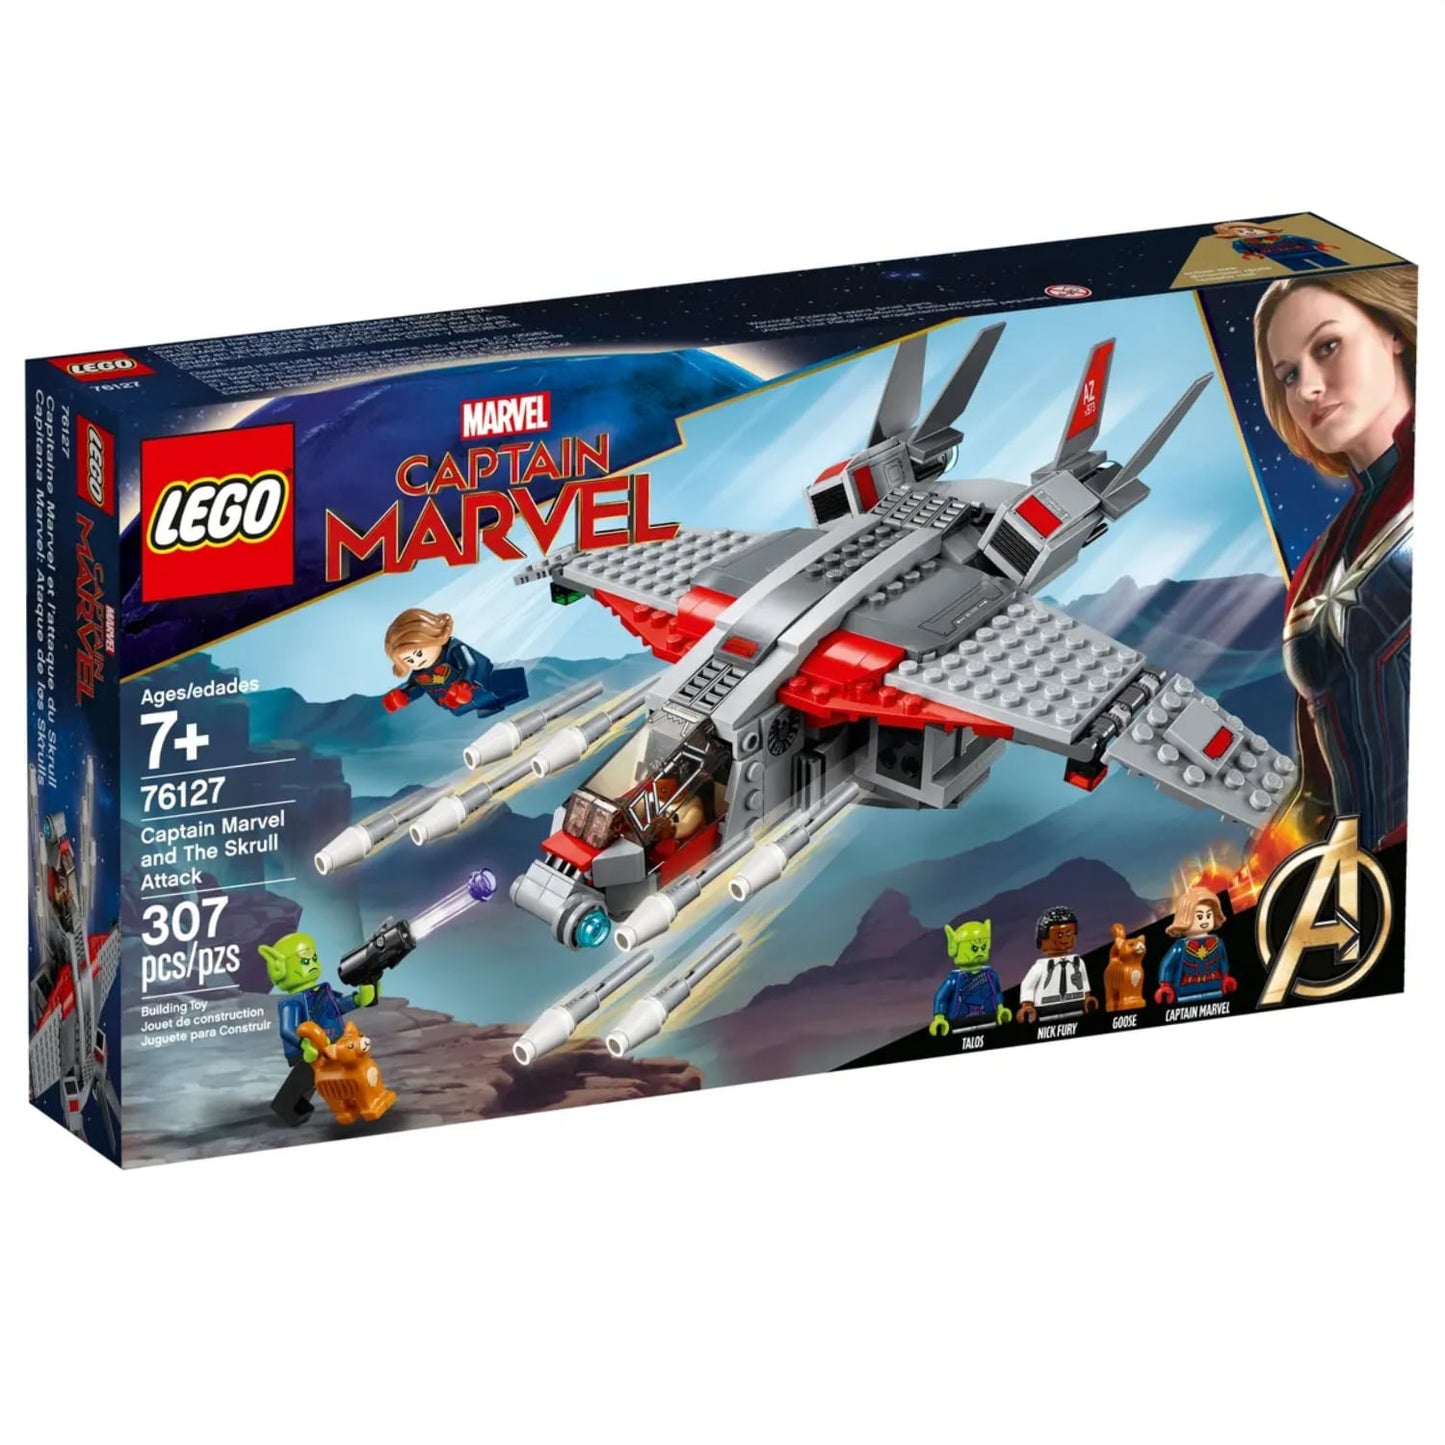 Lego 76127 Marvel Captain Marvel and thel Skrull Attack